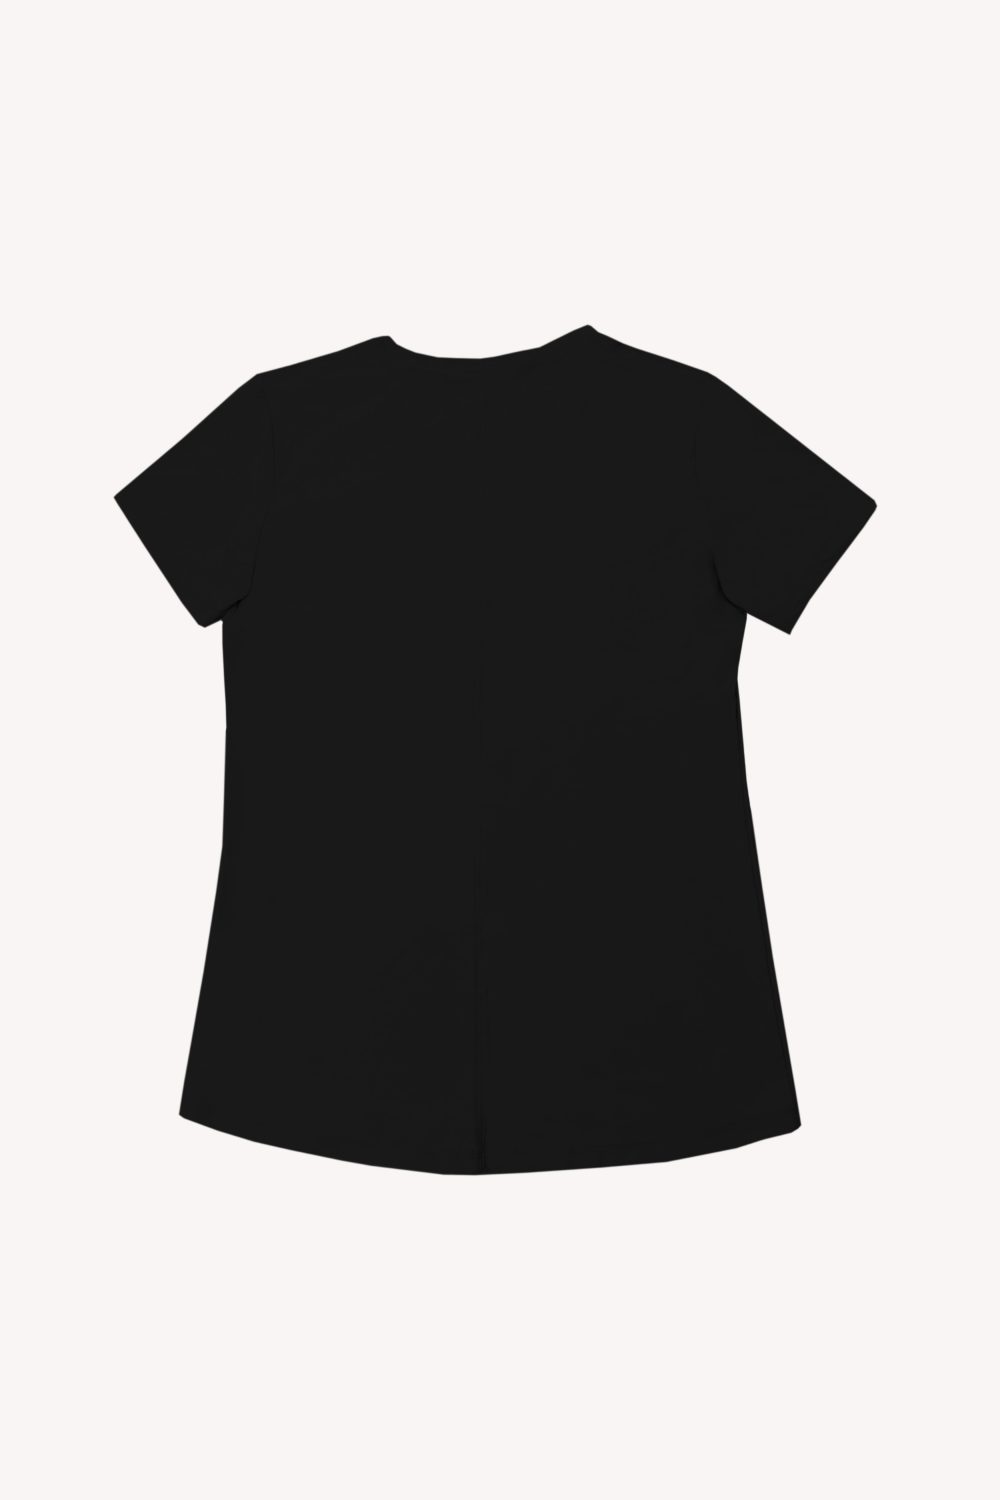 Short Sleeve Top Black Back Eco Friendly Products